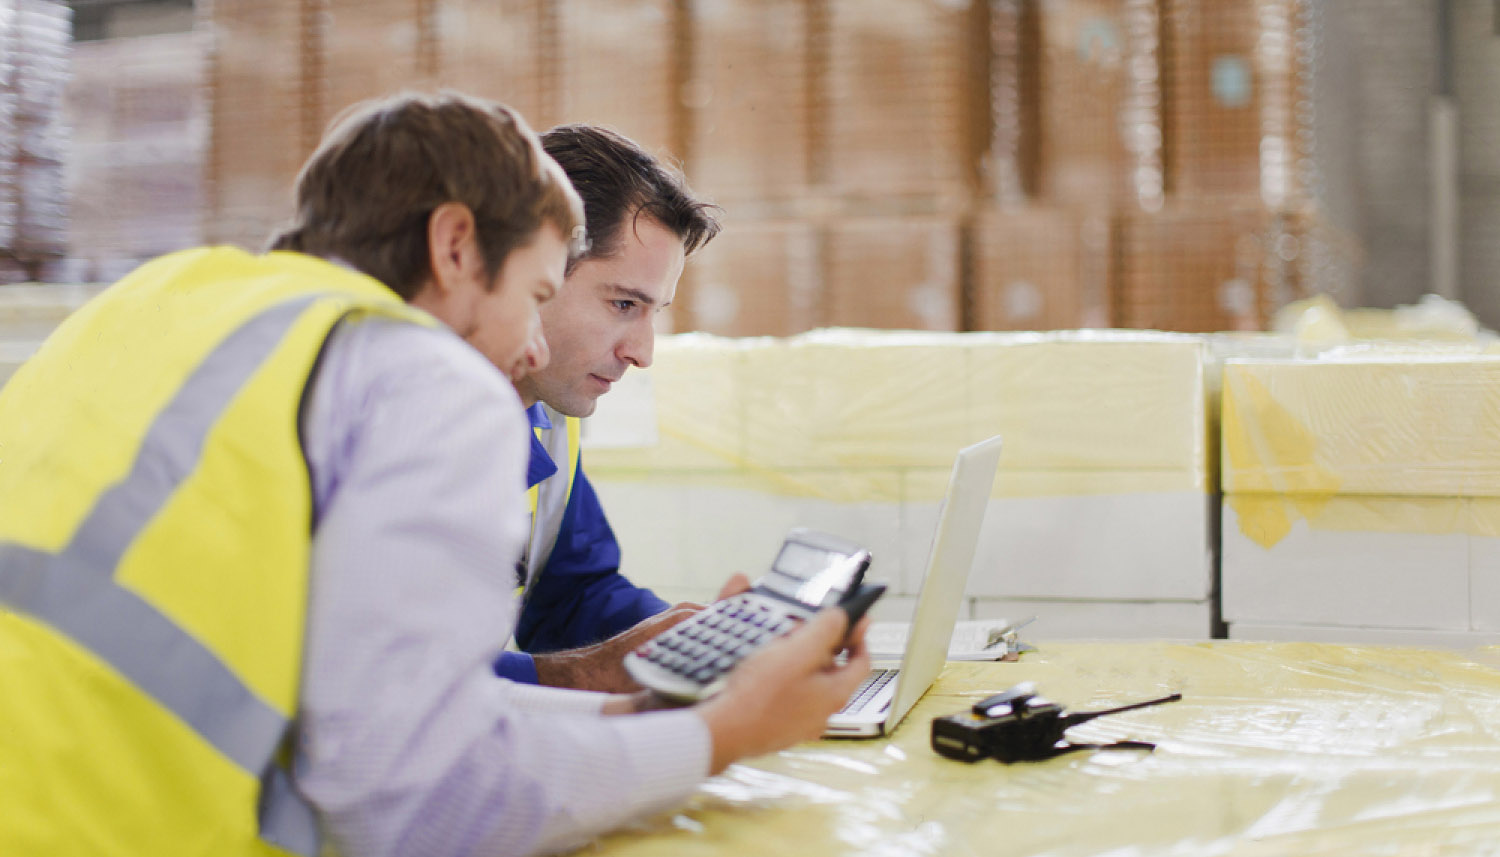 Two men comparing shipping costs at a computer inside a warehouse.